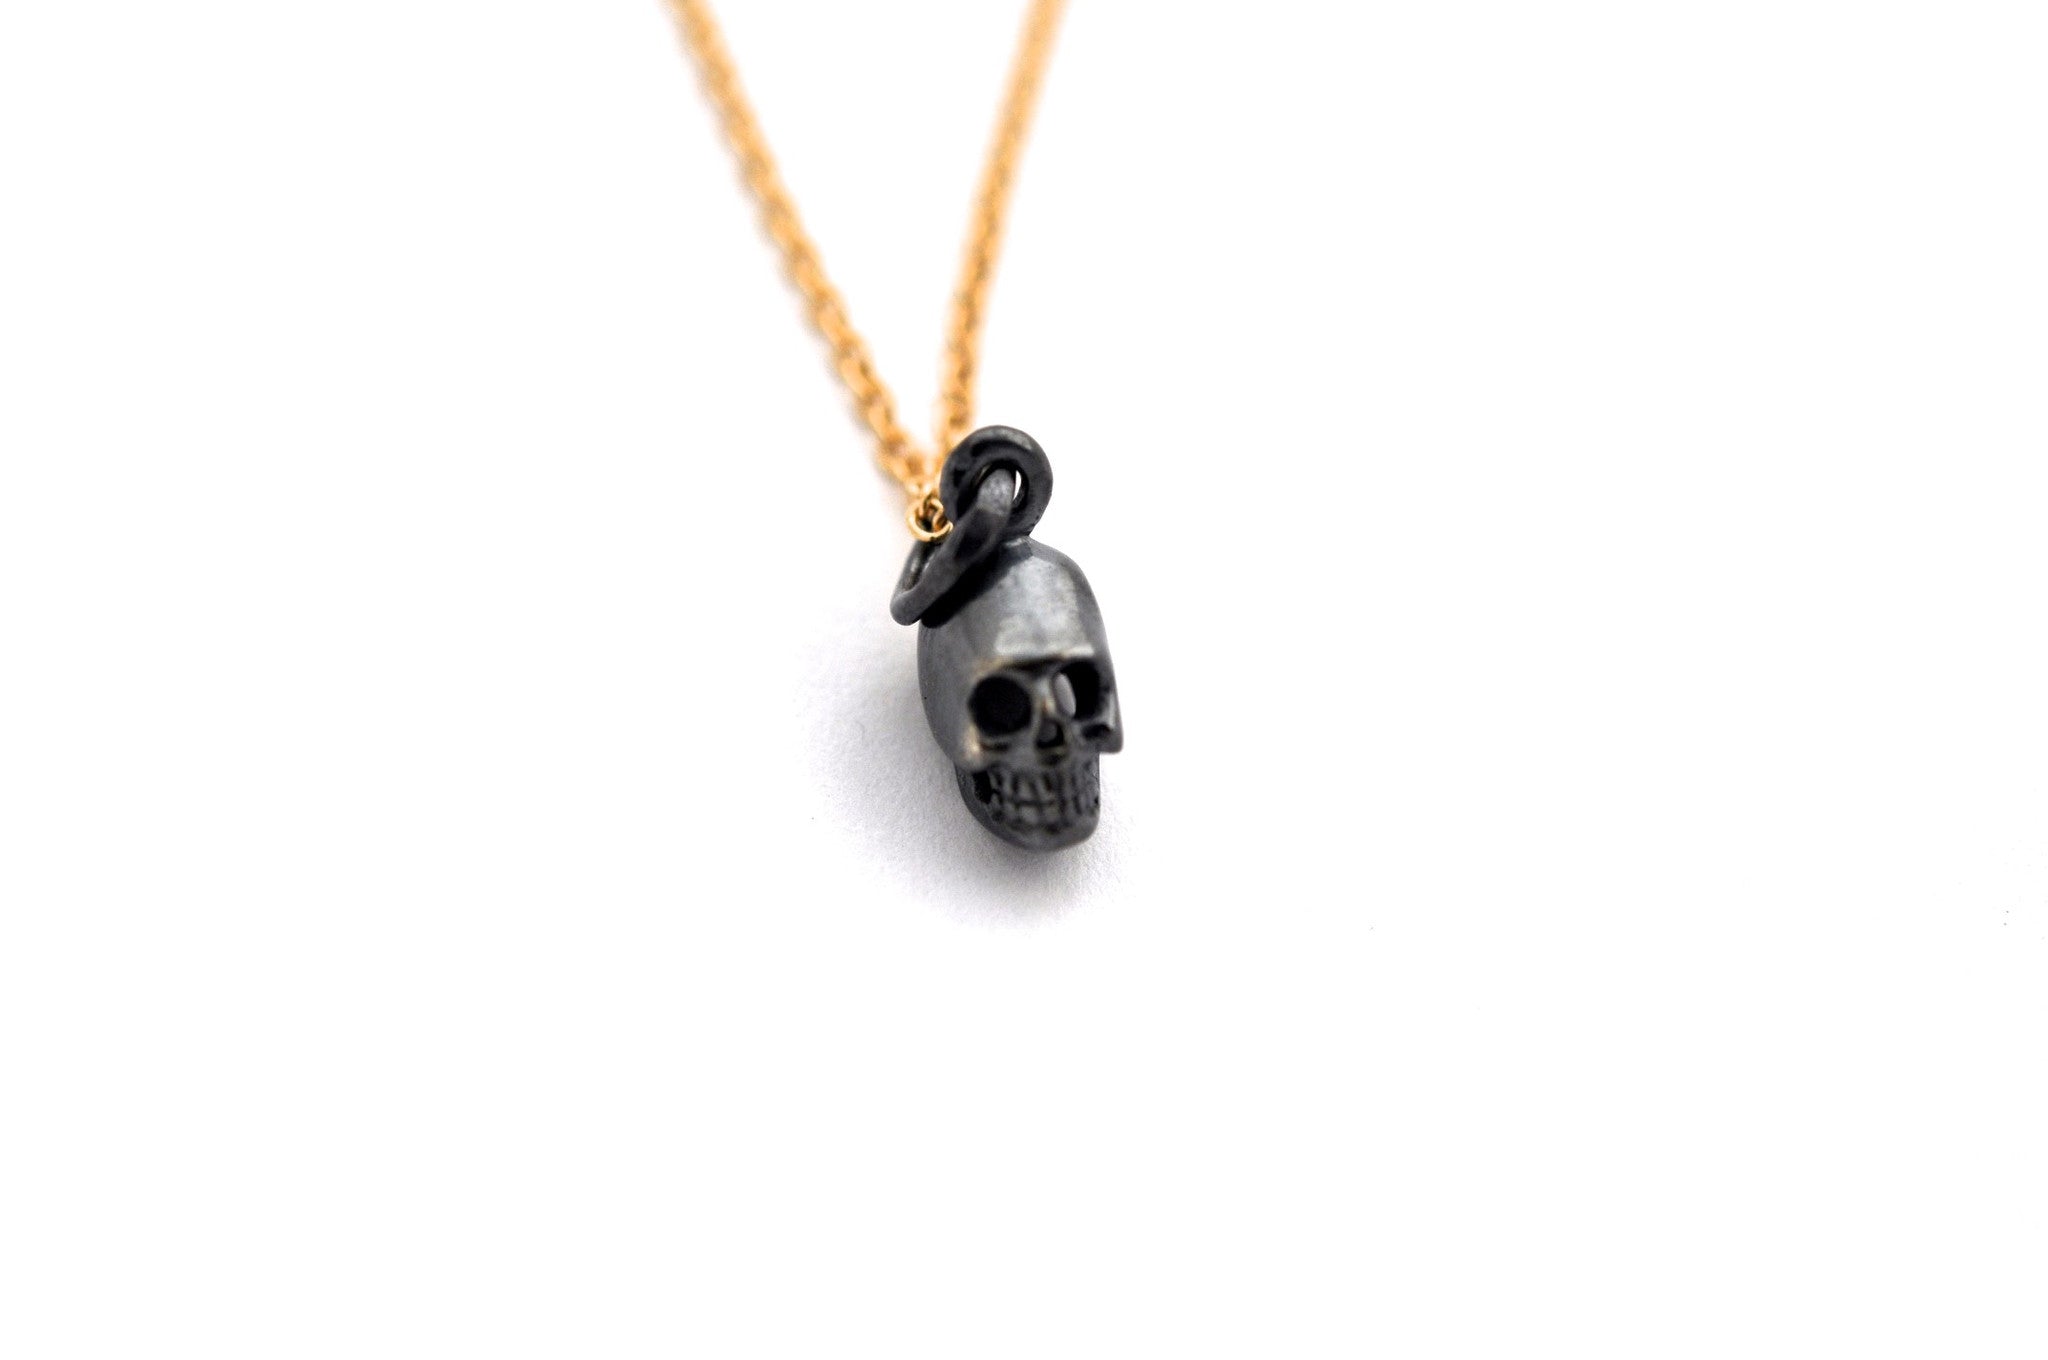 necklace / silver tiny SKULL charm on fine chain